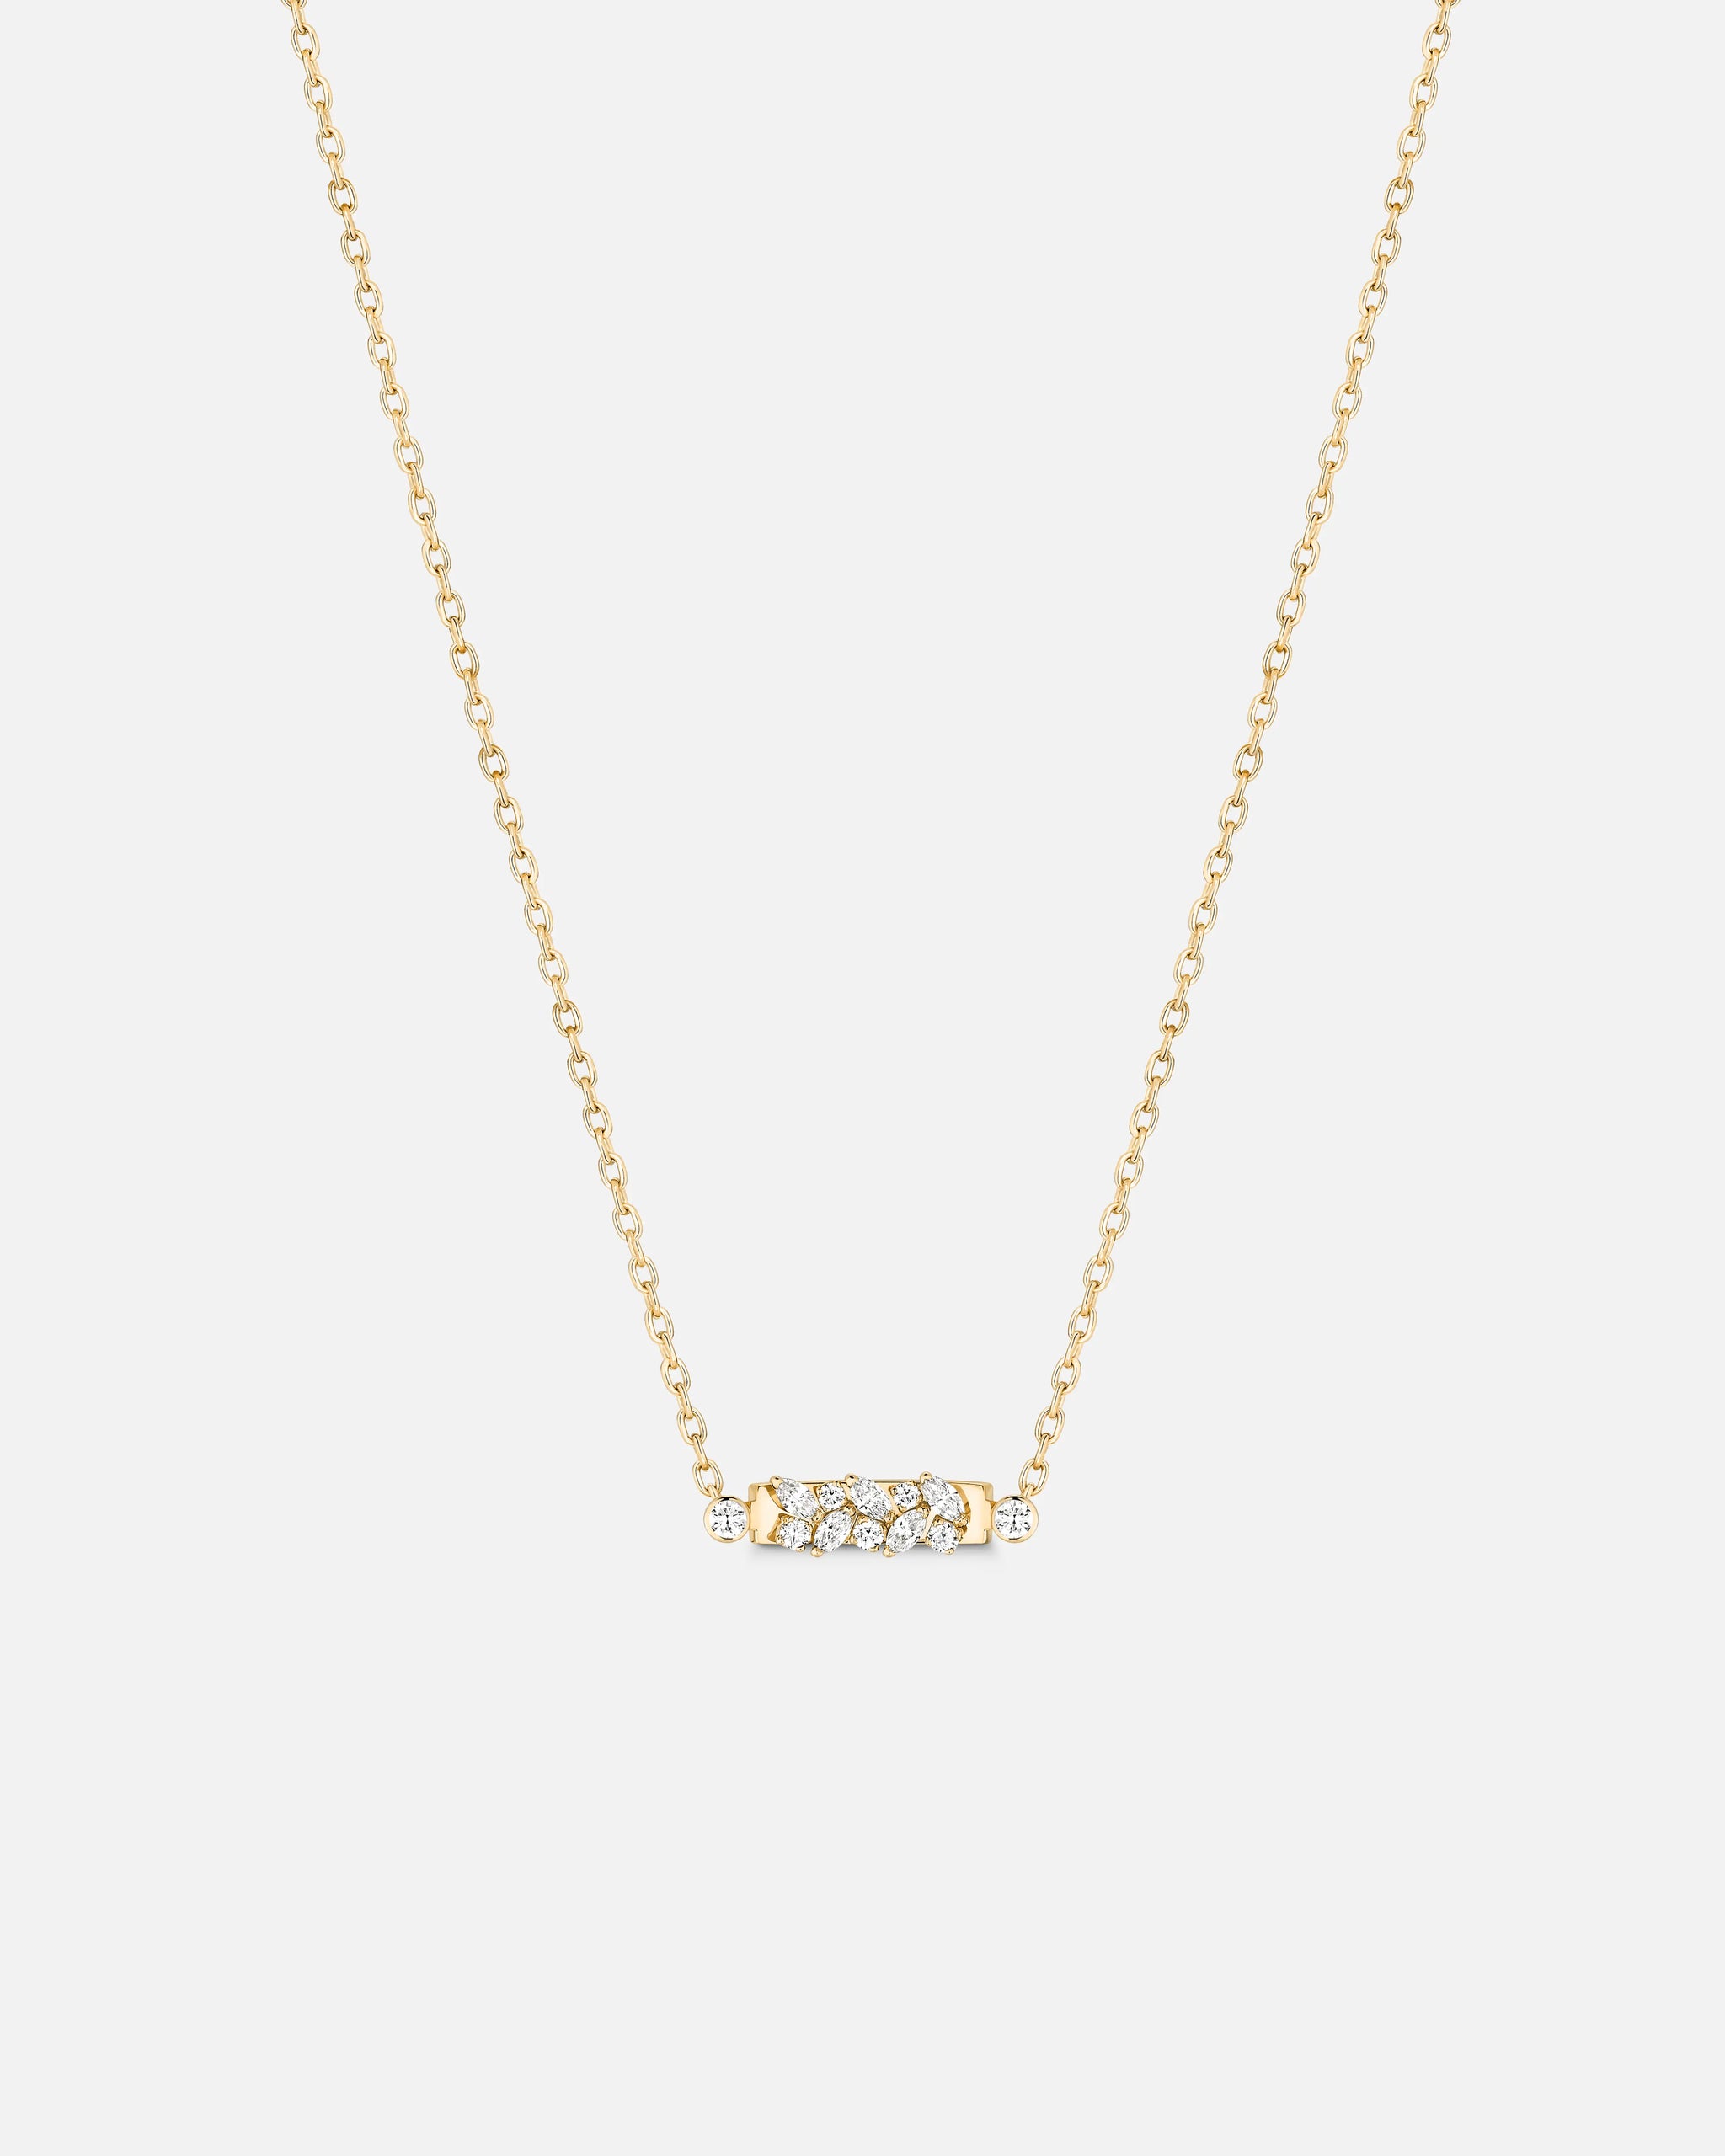 Soirée Mood Pendant in Yellow Gold - 1 - Nouvel Heritage